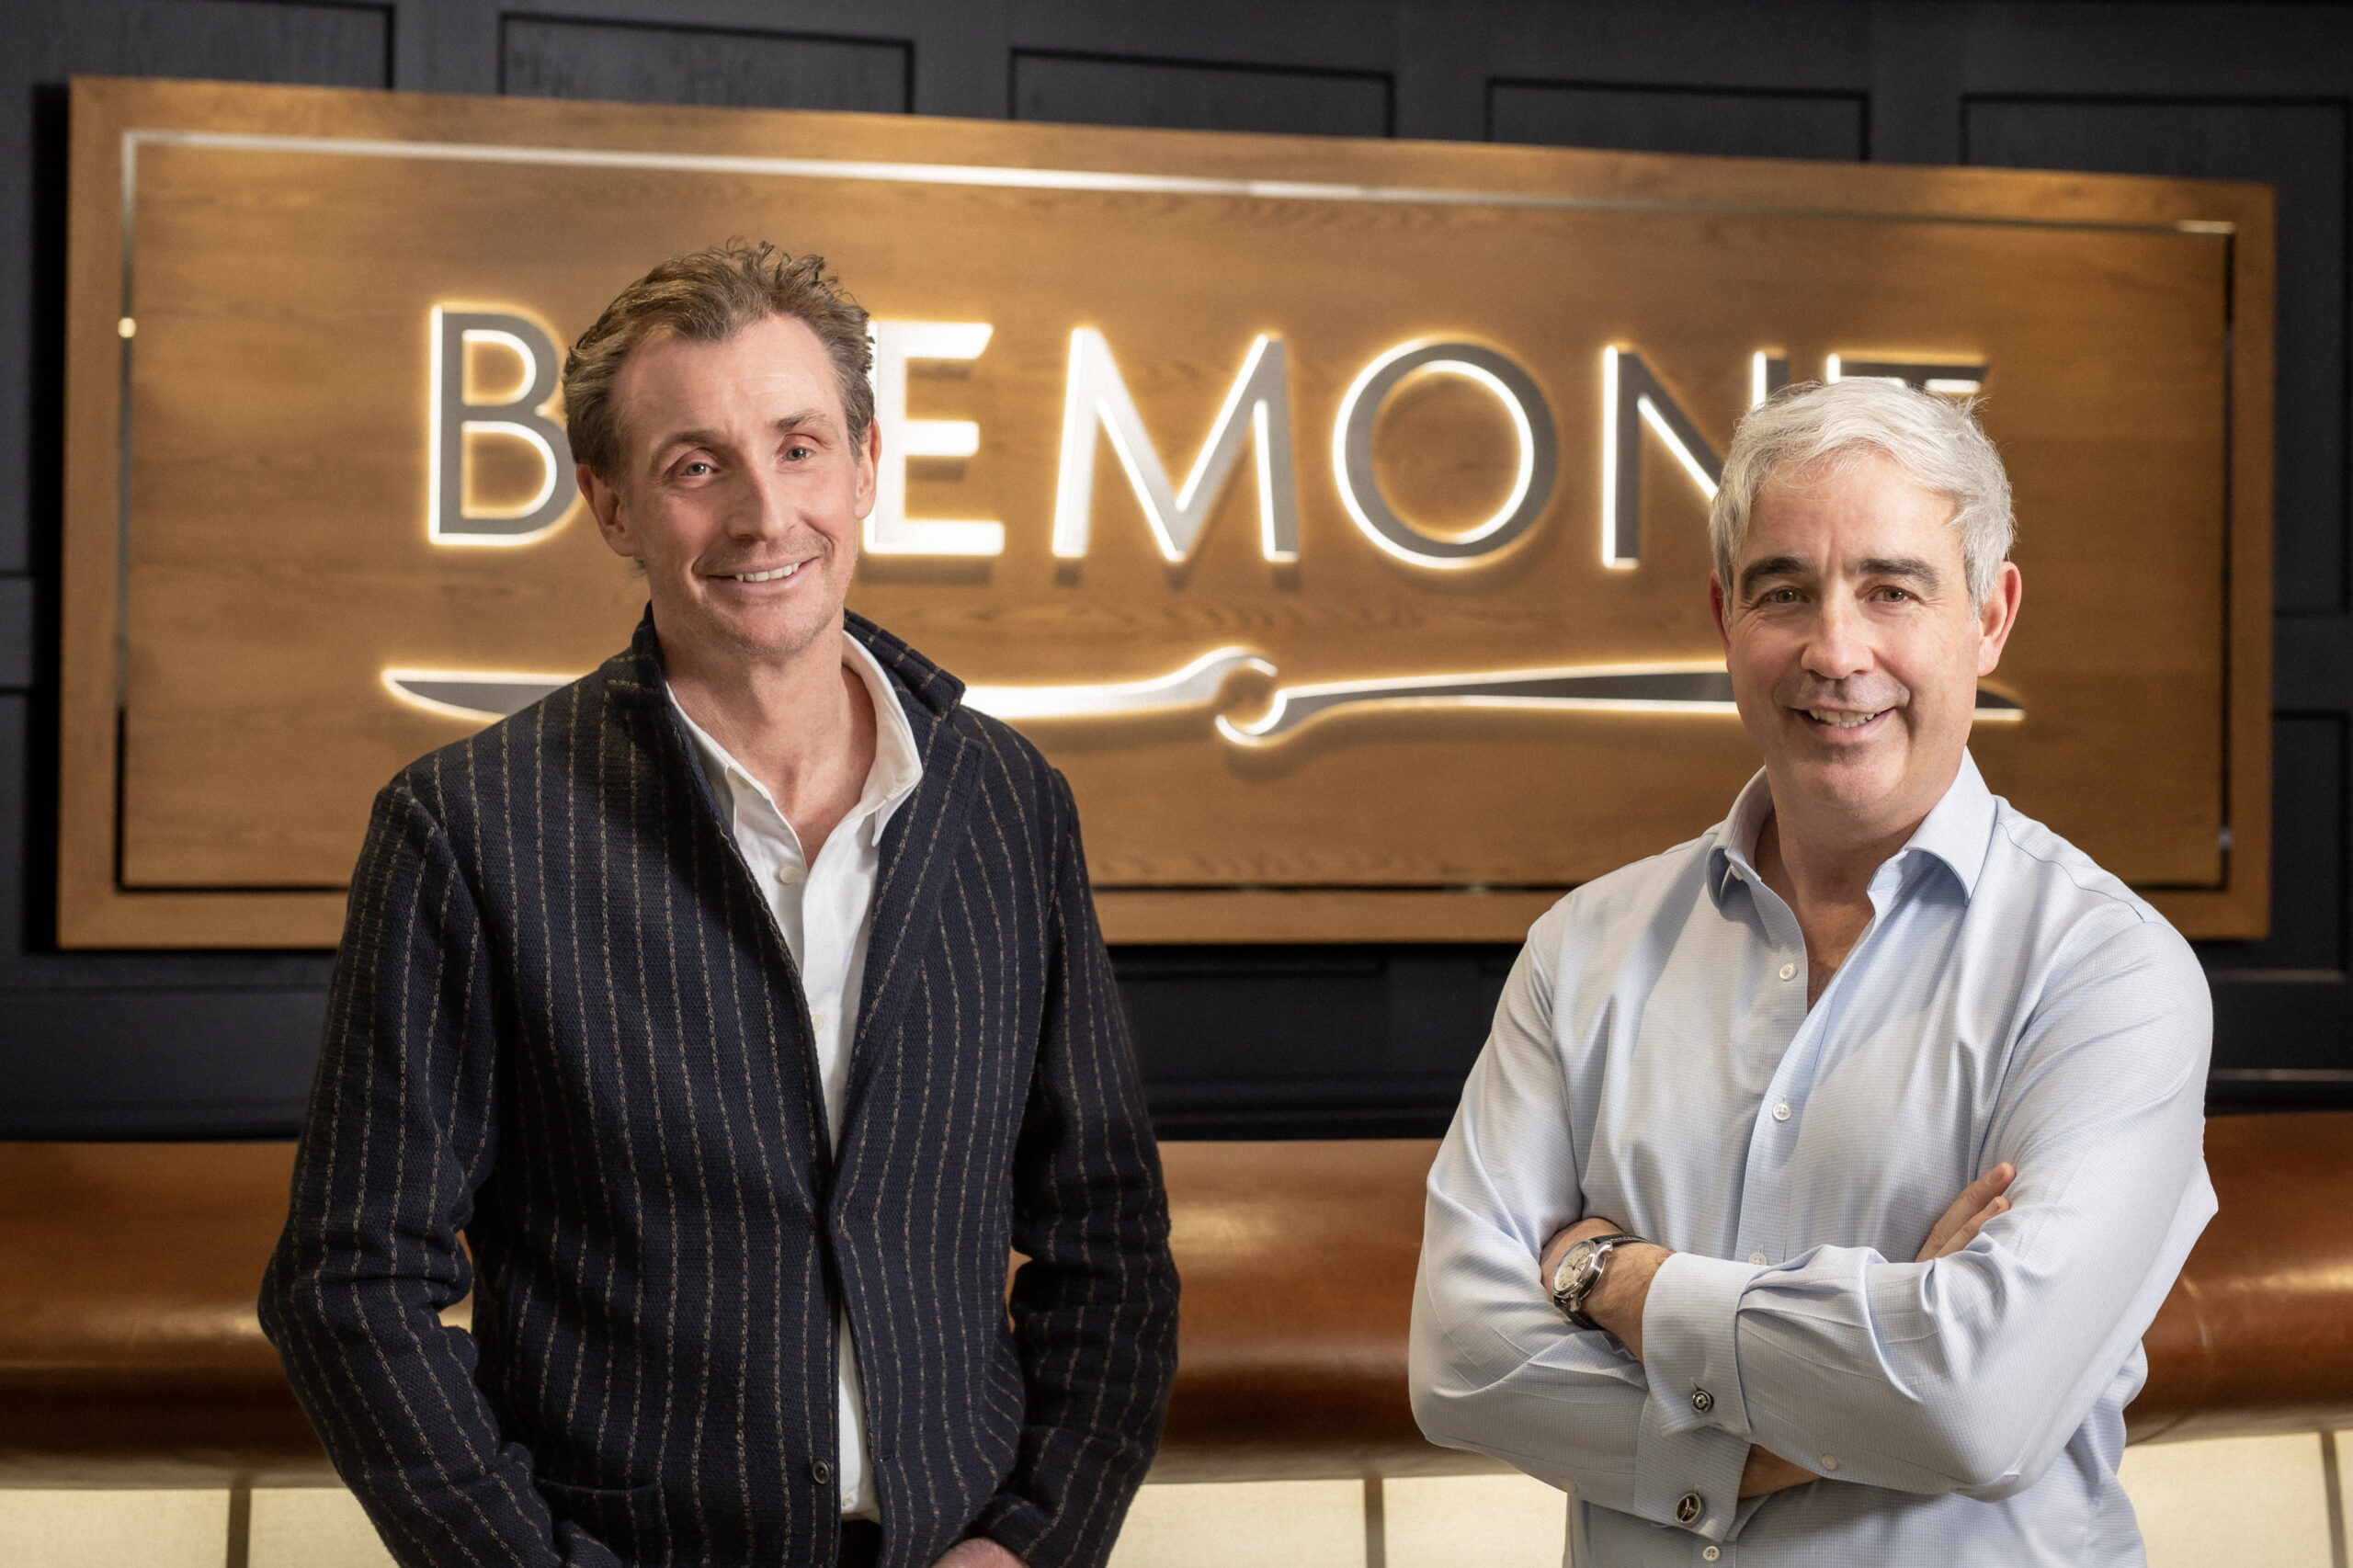 Bremont's £48. 8m investment from bill ackman and hellcat lp ng headshot 050 scaled